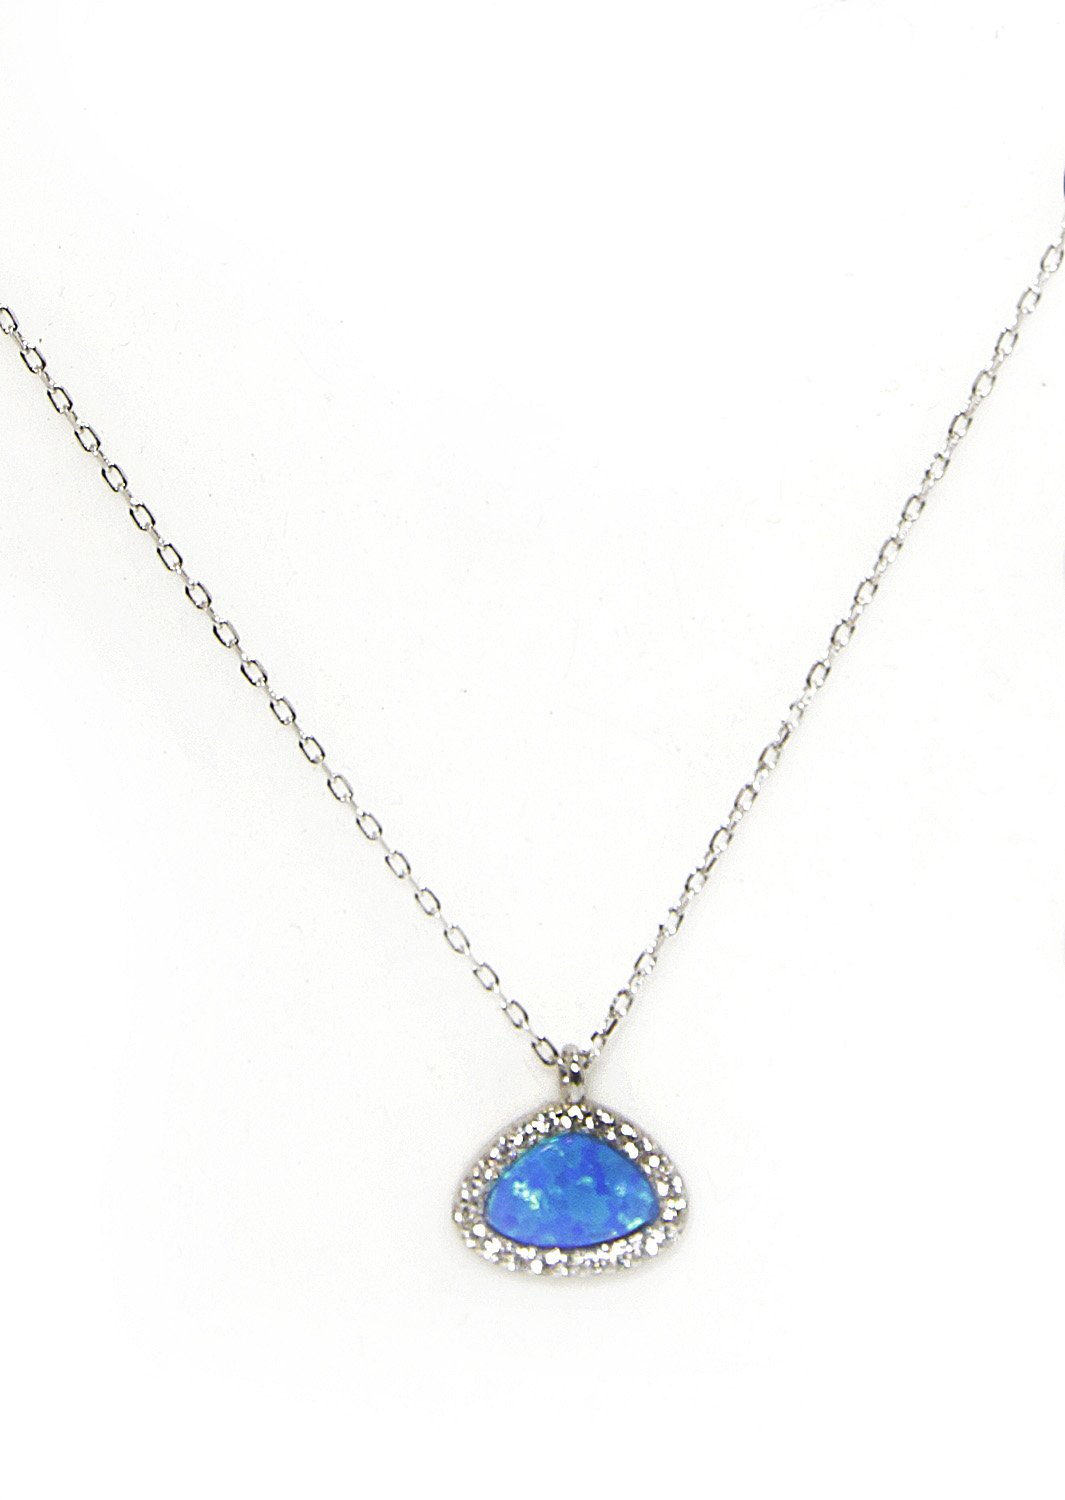 Blue opal pendant silver necklace with zircon